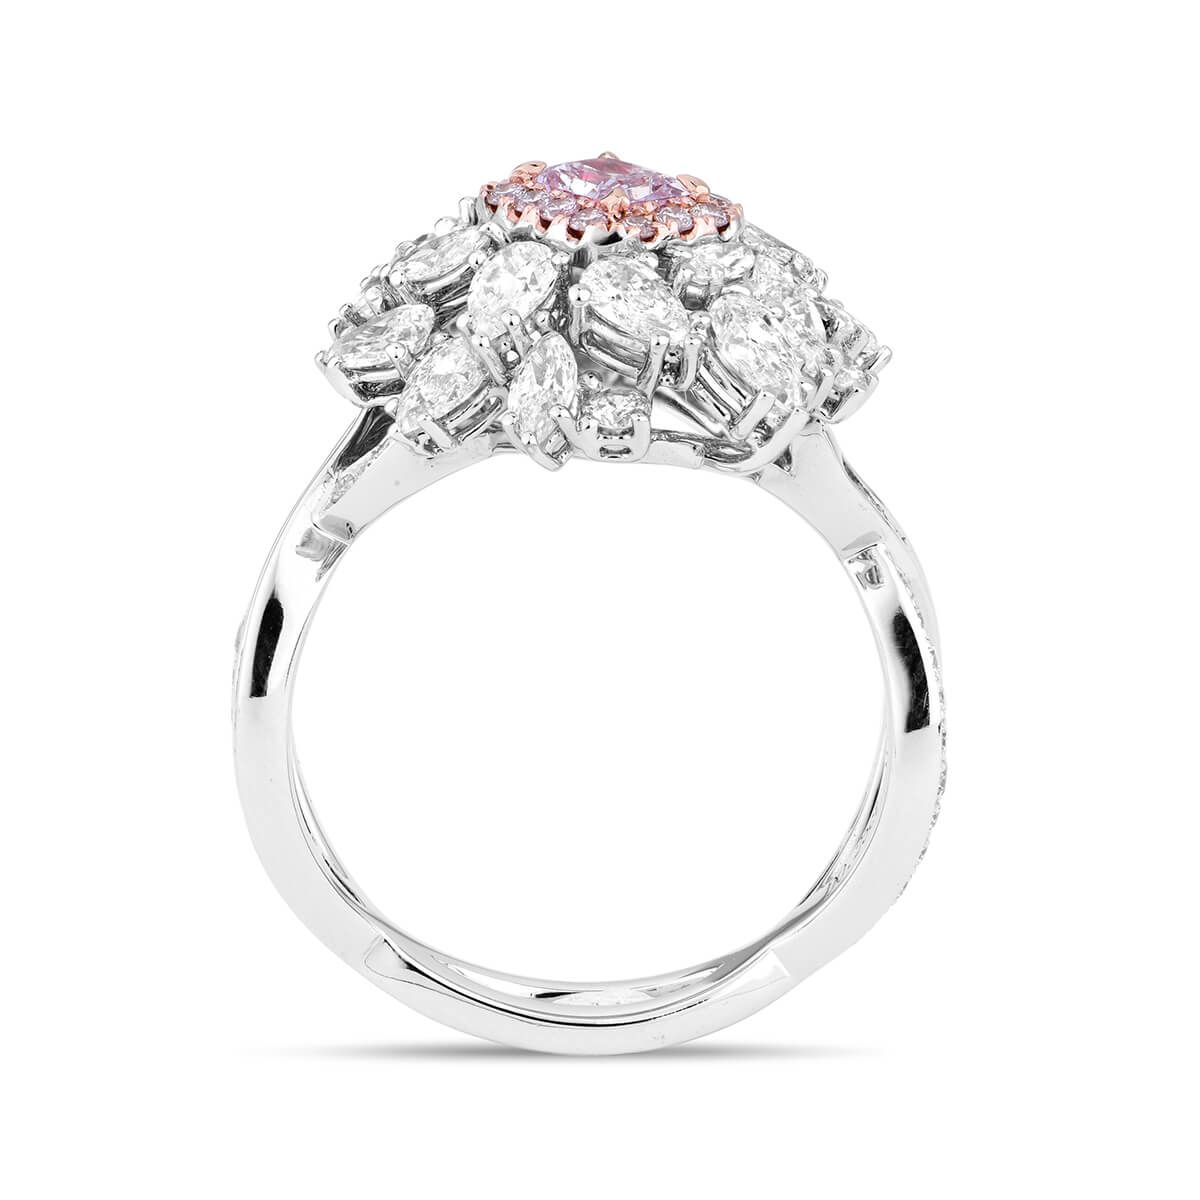 Light Pink Diamond Ring, 0.25 Ct. (2.09 Ct. TW), Radiant shape, GIA Certified, 1196355357